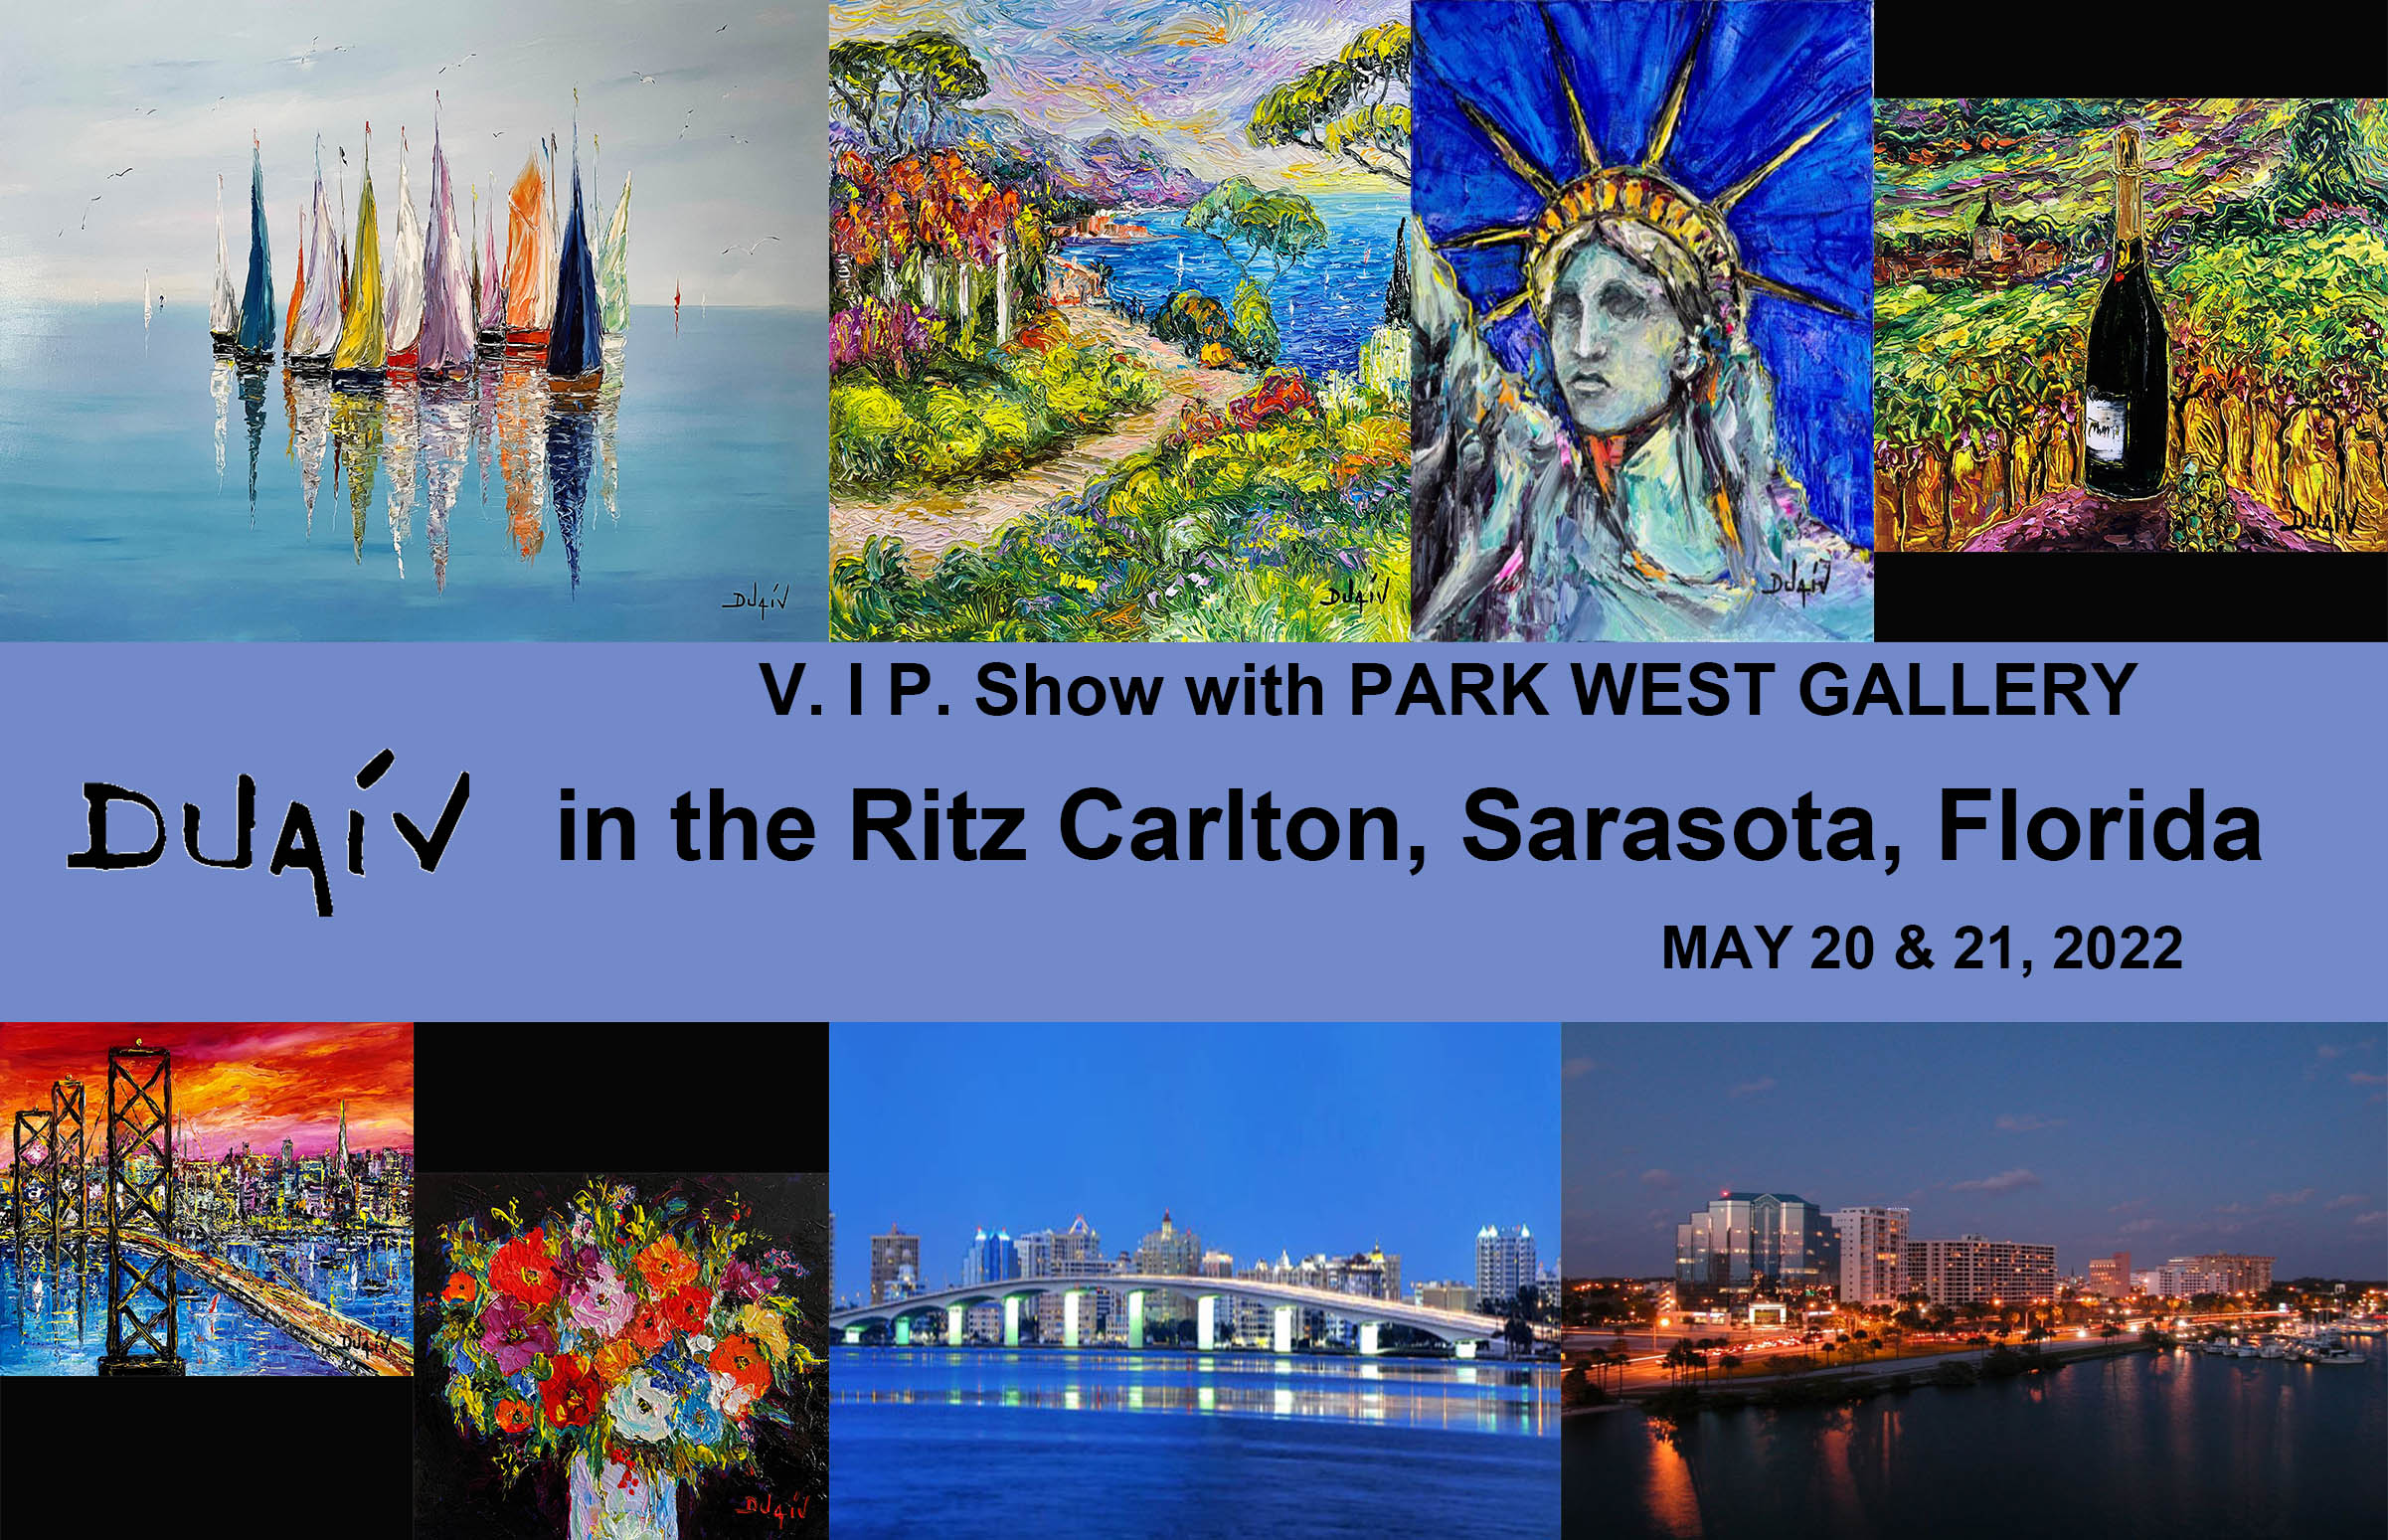 VIP Event with PARK WEST in THE RITZ CARLTON SARASOTA - May 20& 21, 2022